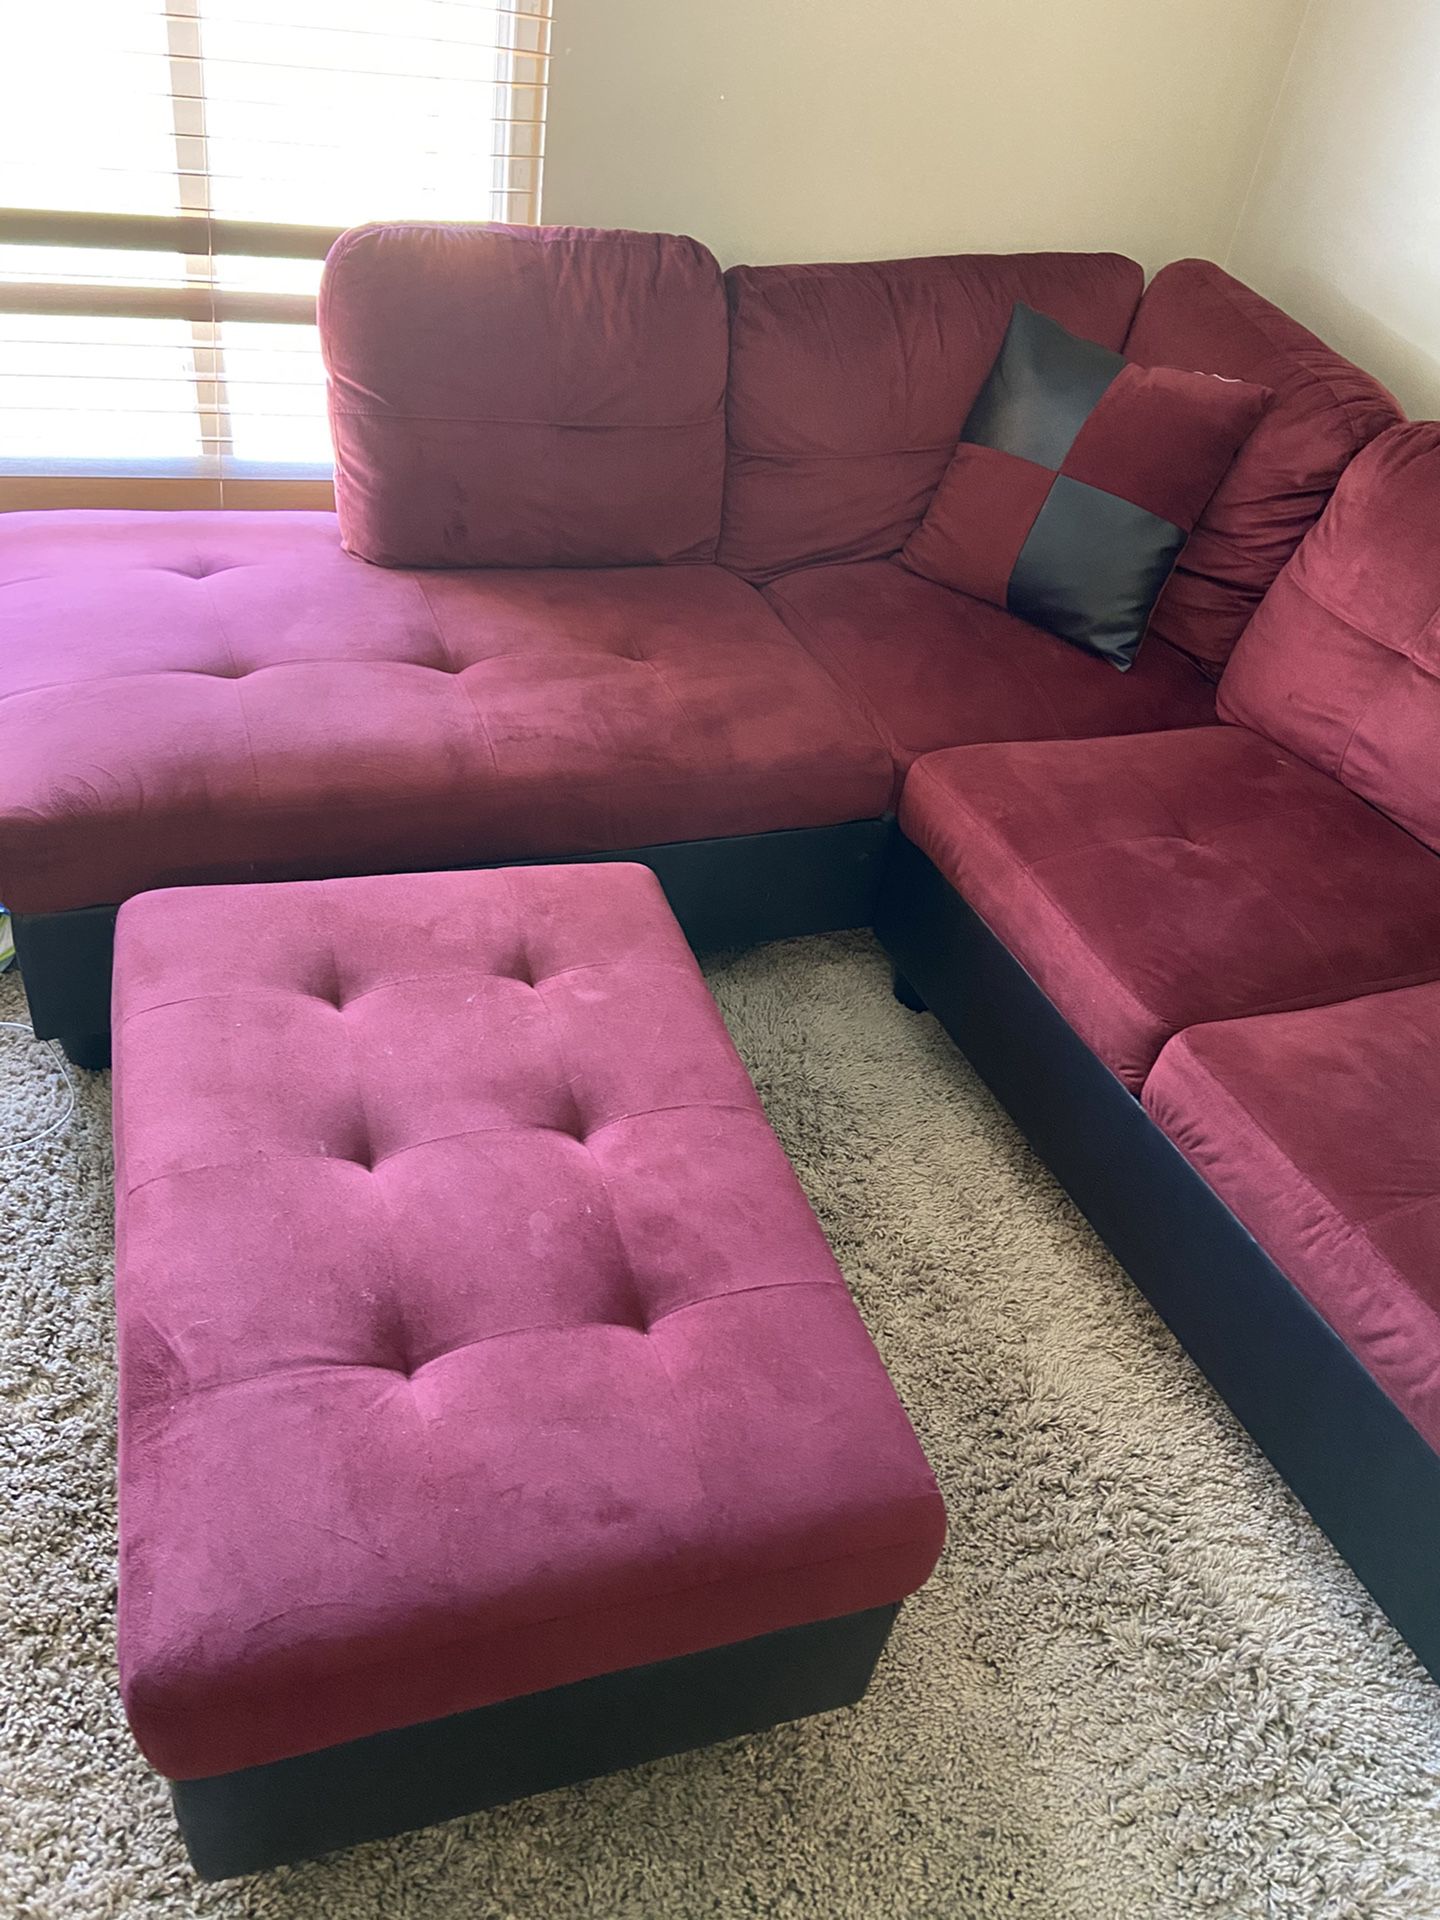 Sectional couch and ottoman